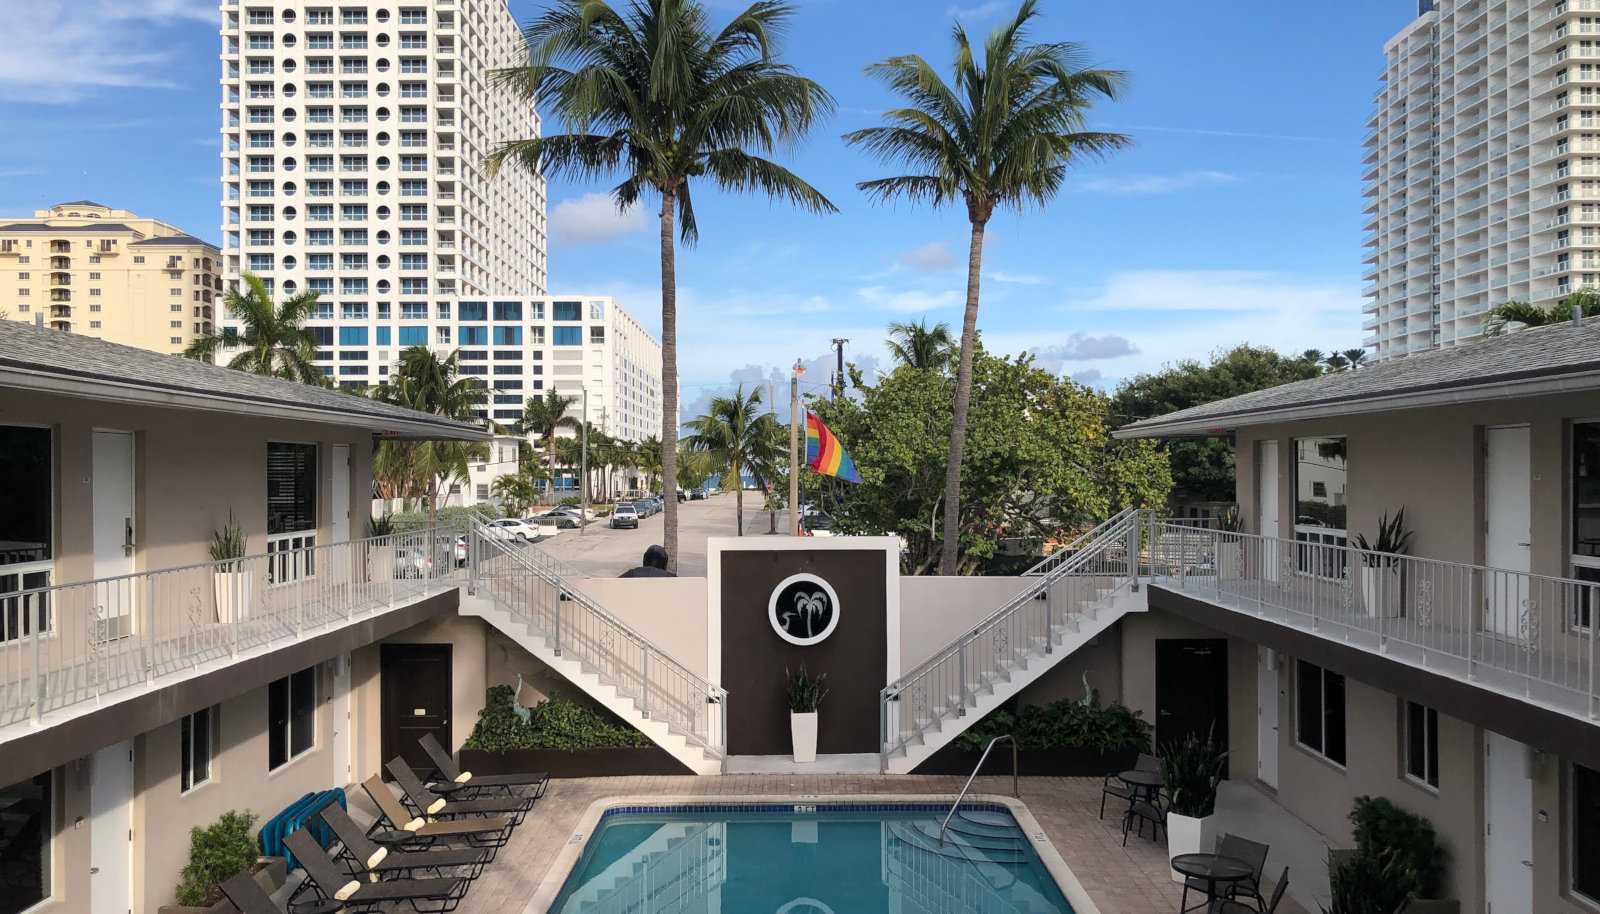 The Grand Resort is one of the best gay guest houses in Fort Lauderdale, Florida.